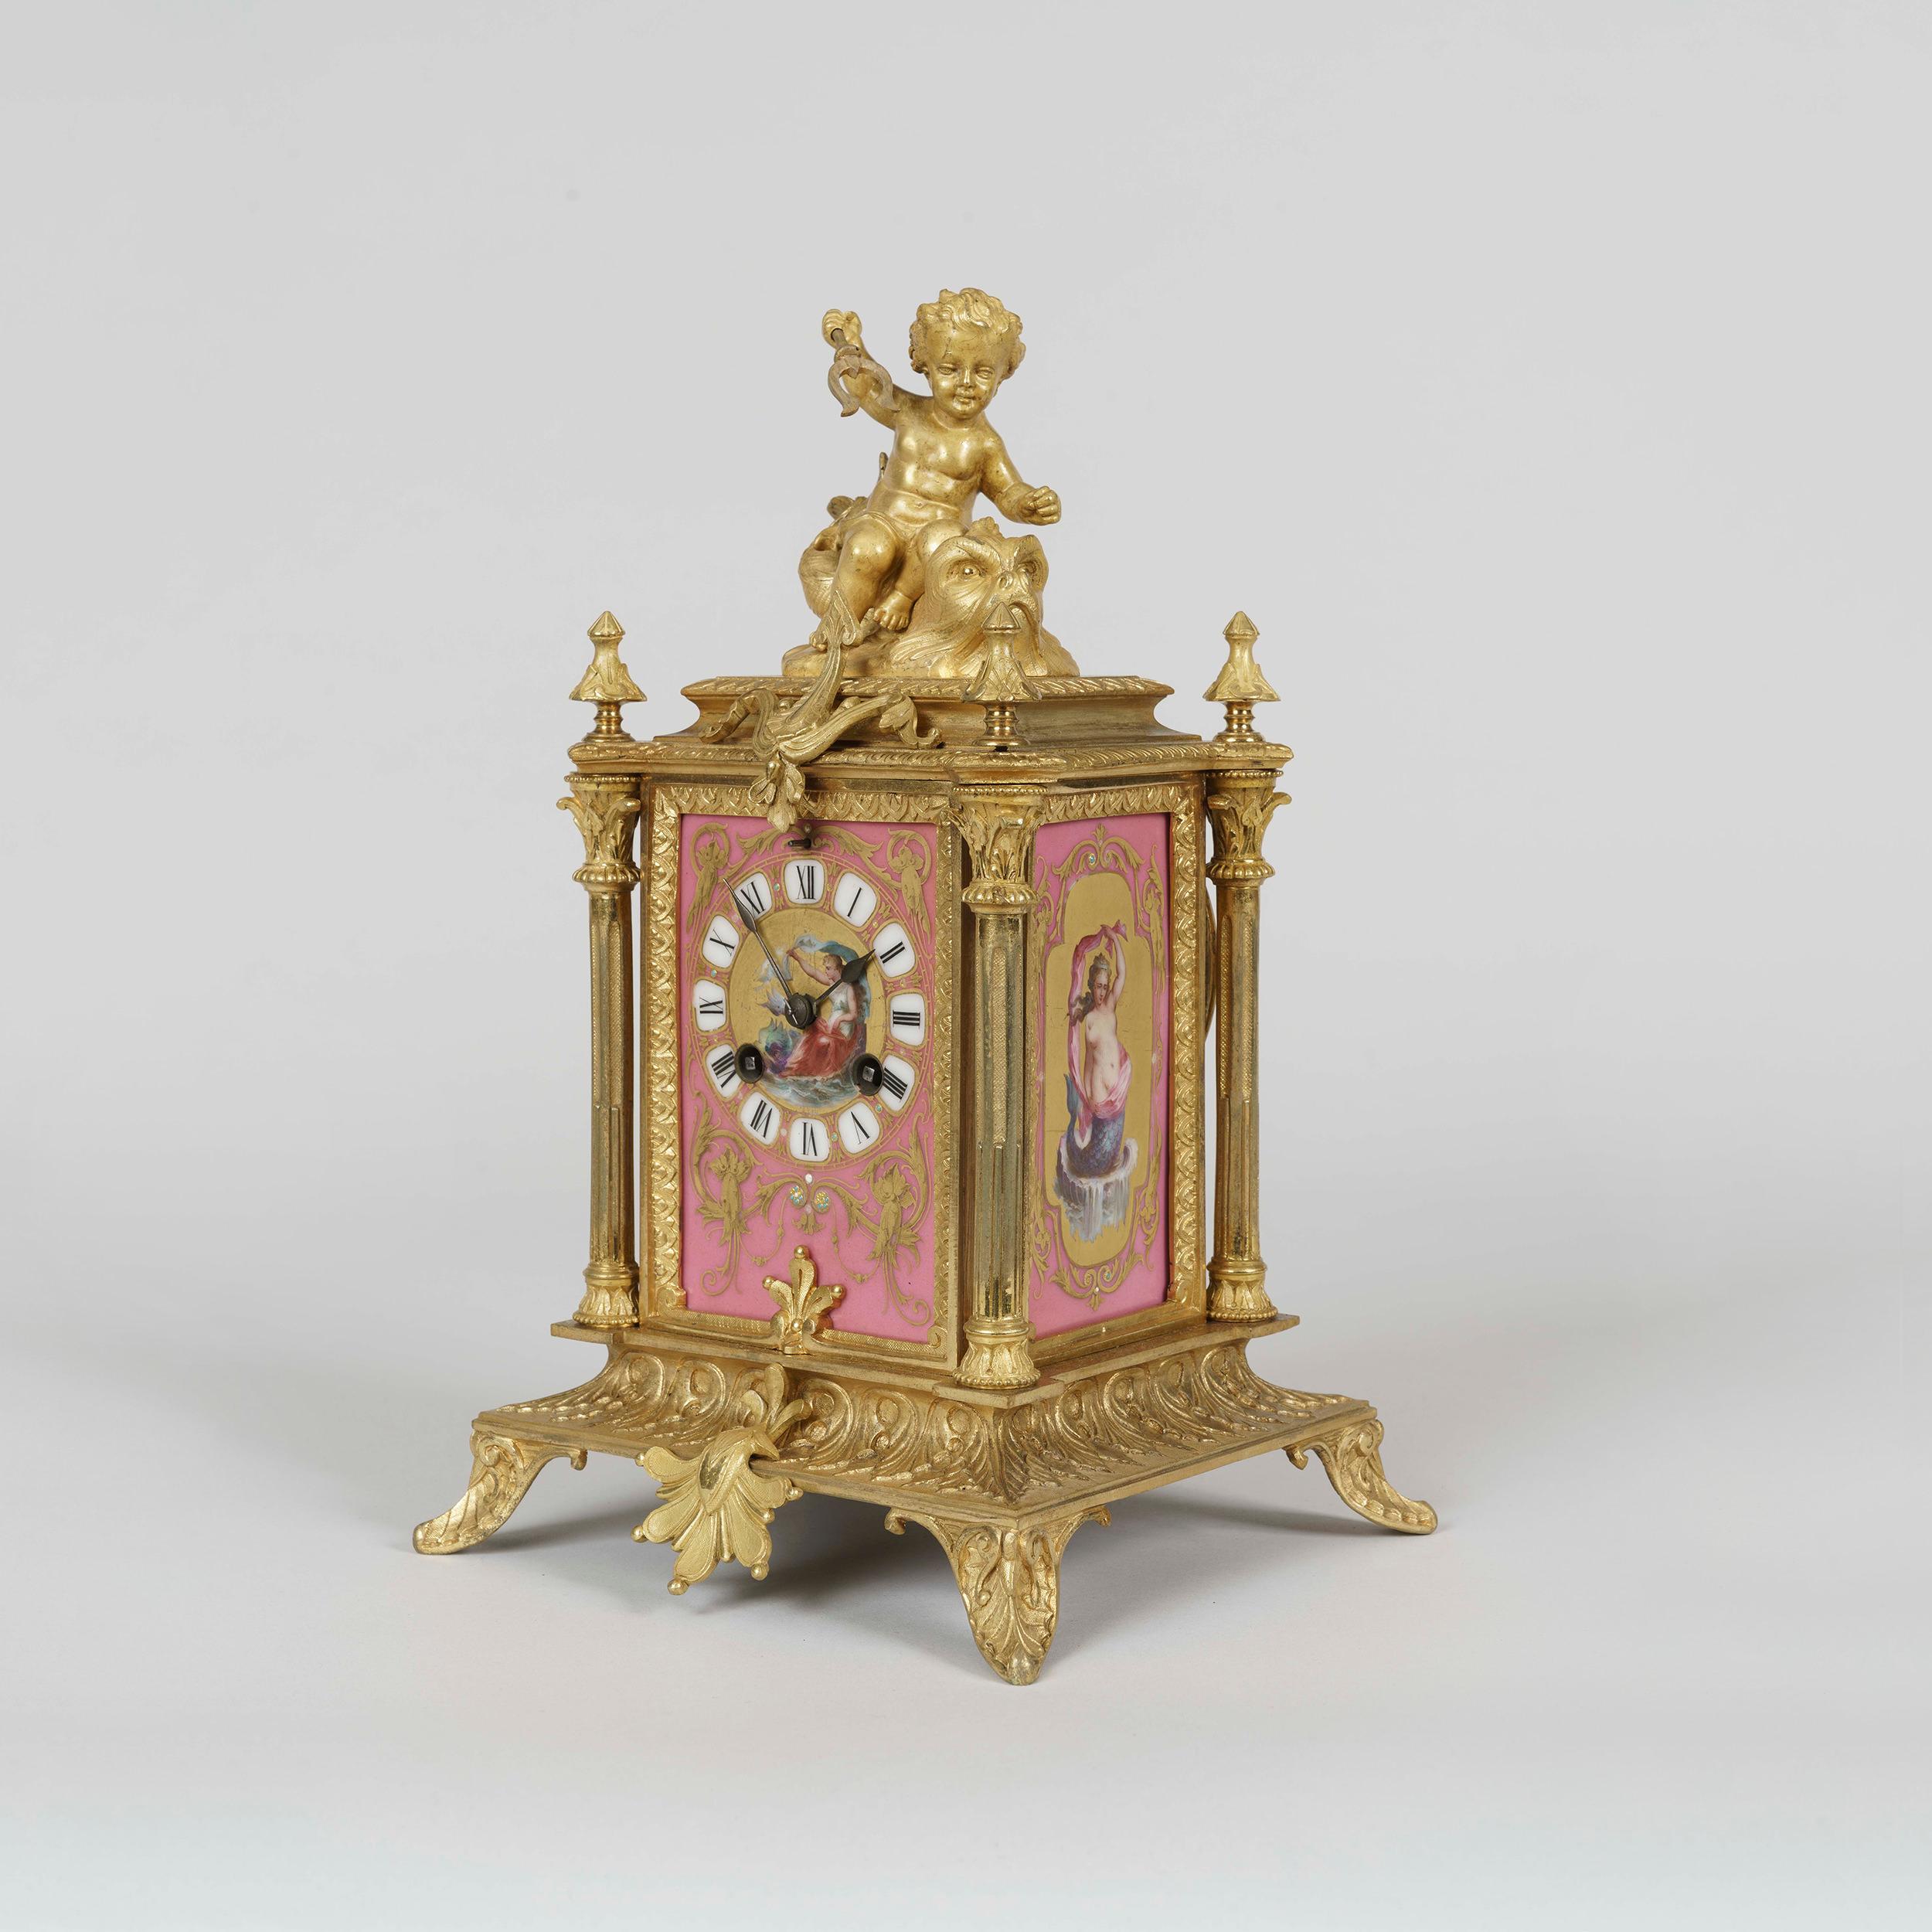 A table clock in the Louis XVI Manner
By Japy Frères

The finely chased ormolu case is dressed with pink 'Sèvres' style hand decorated polychrome panels to the face and sides, depicting Venus and Nereids respectively; the clock having fluted